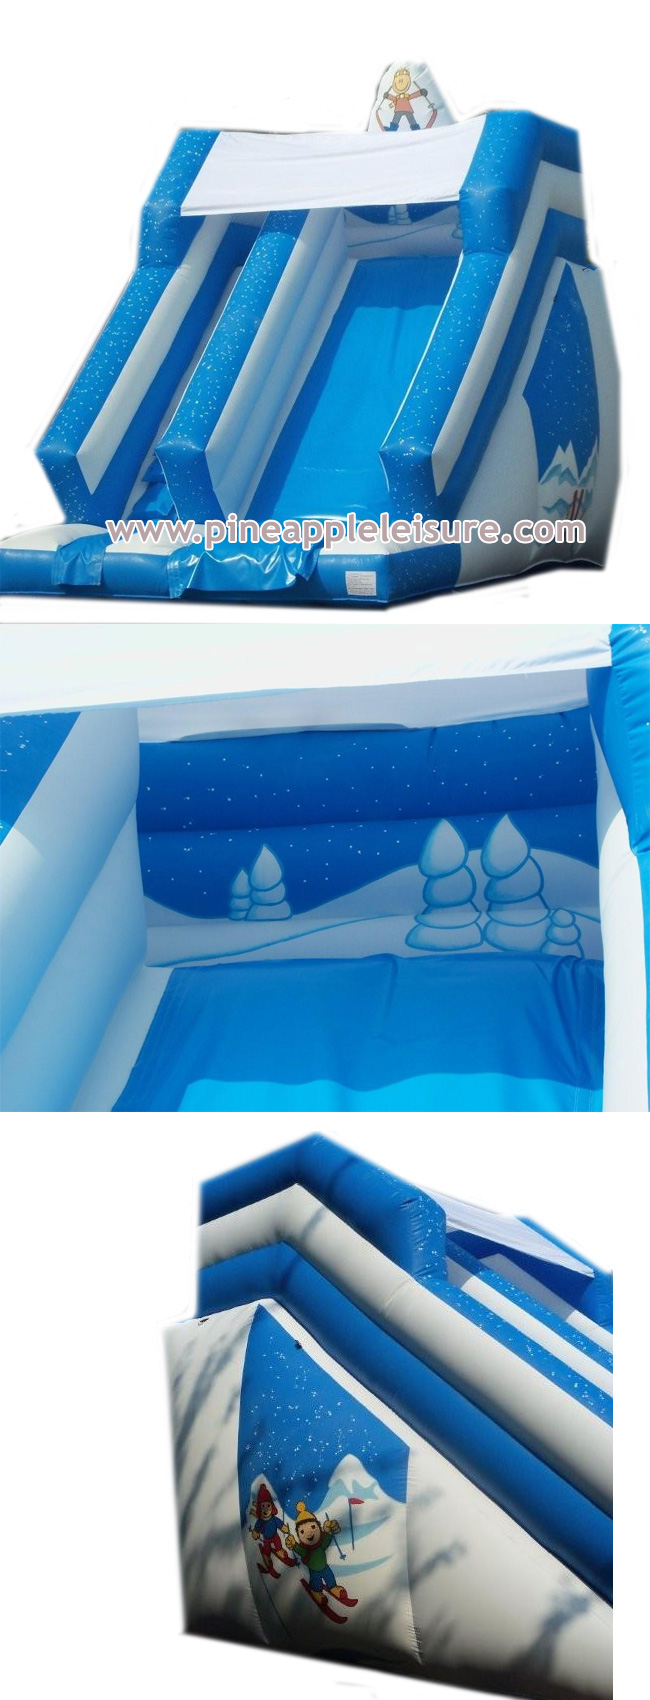 Bouncy Castle Sales - BS37 - Bouncy Inflatable for sale